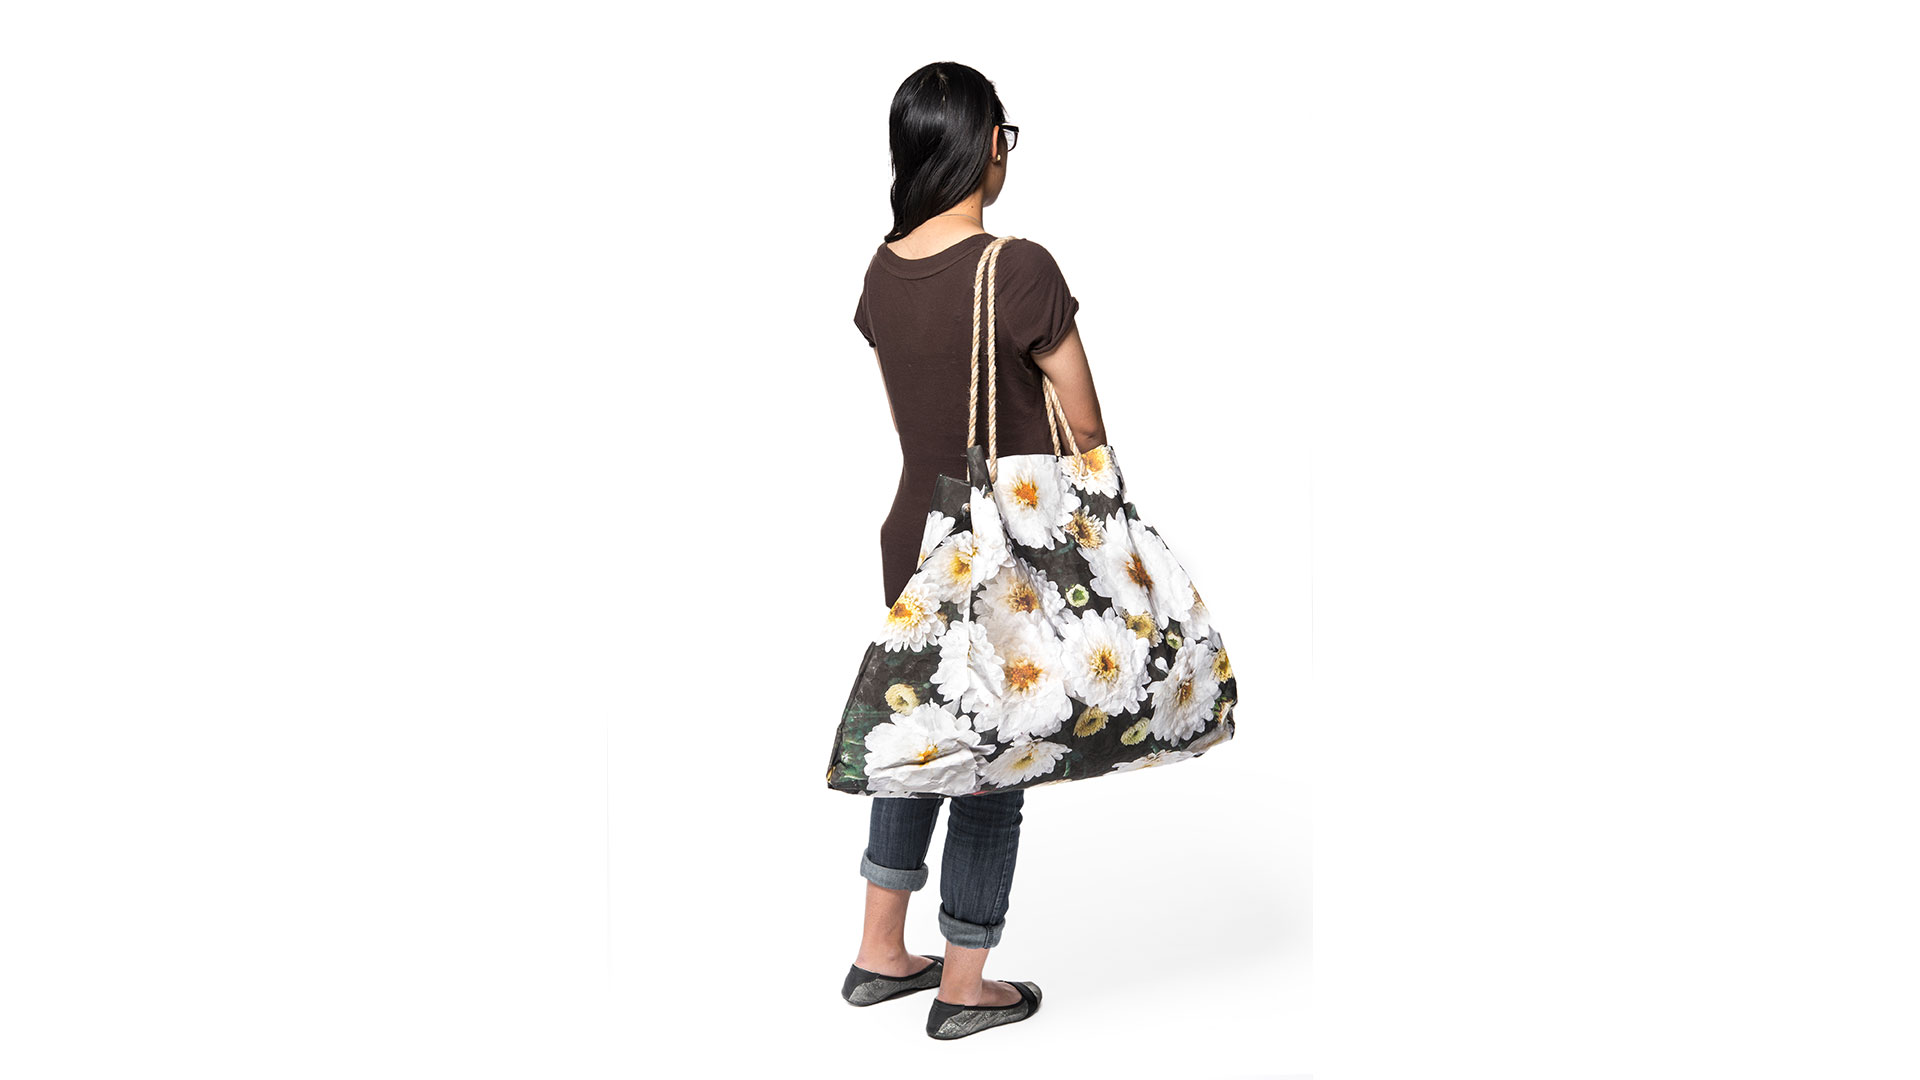 Student with large daisy bag over shoulder showcasing large size of bag